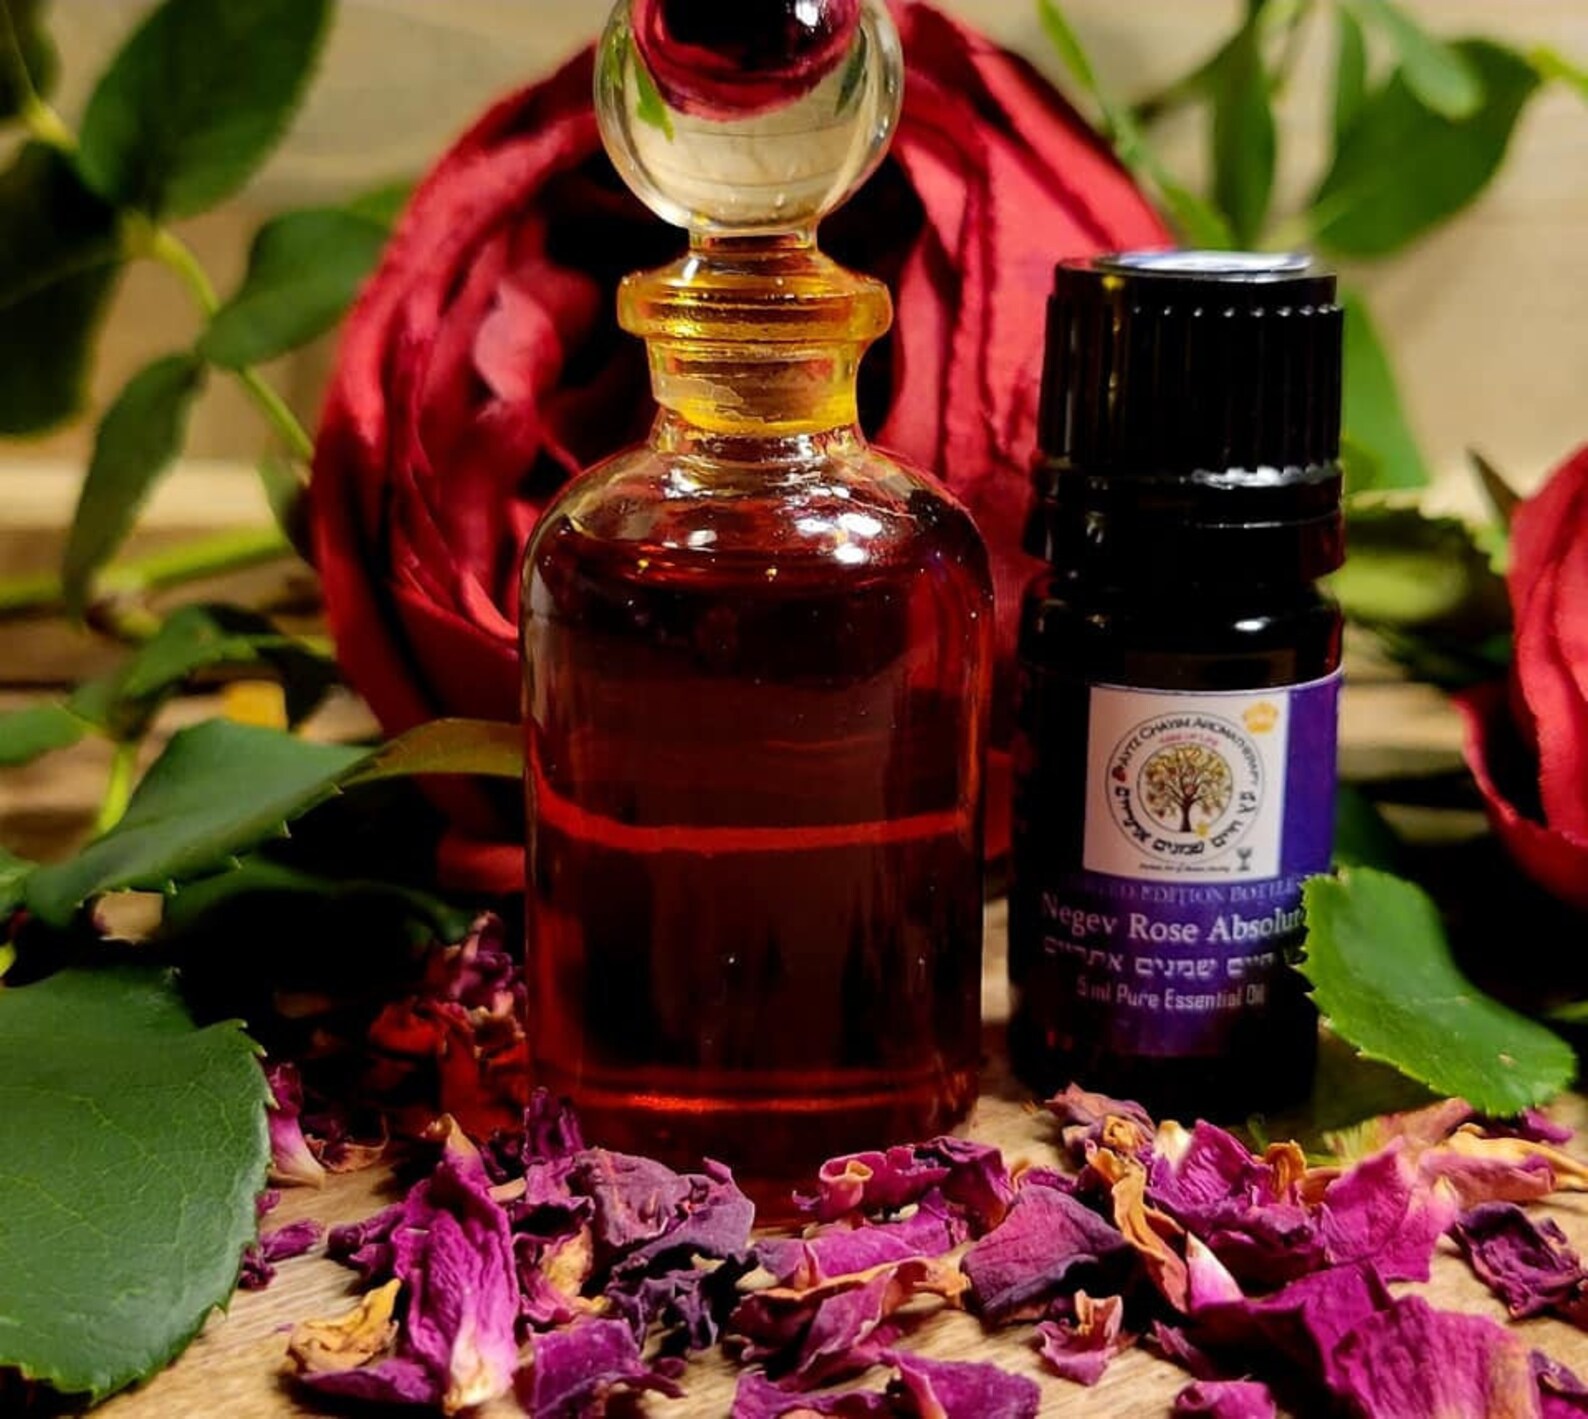 Original Negev Rose Abs 5ml High Quality Essential Oil- Israel Limited  Supply Comes in a MIRON VIOLETGLASS BOTTLE - Aytz Chayim Aromatherapy